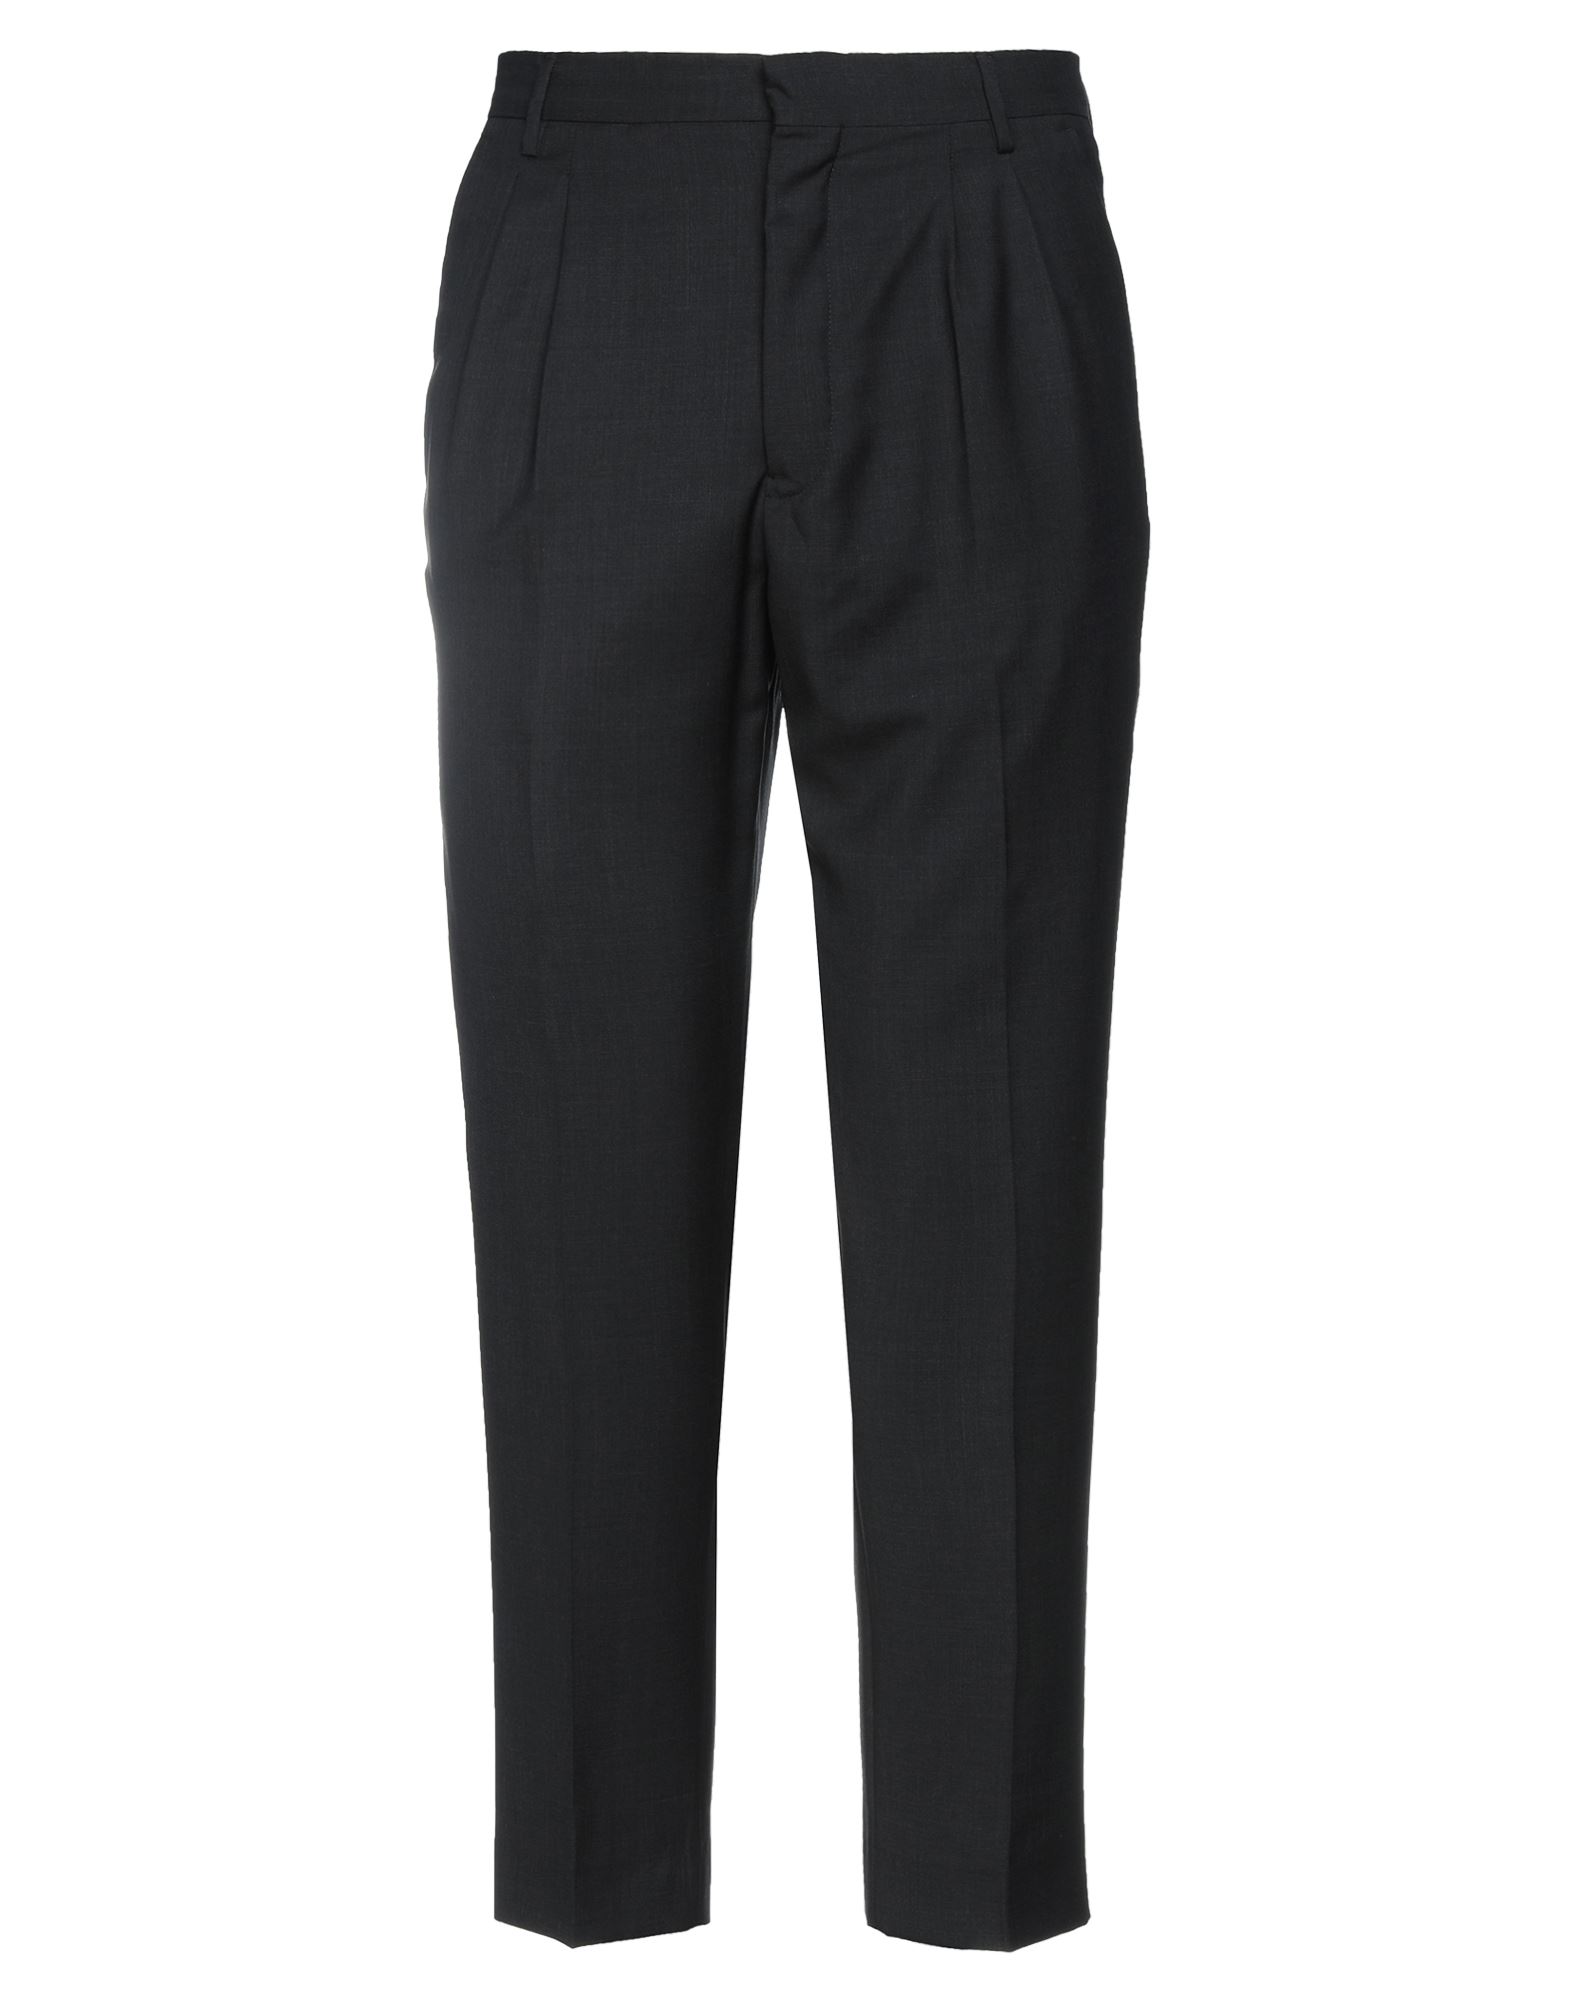 Mauro Grifoni Pants In Steel Grey